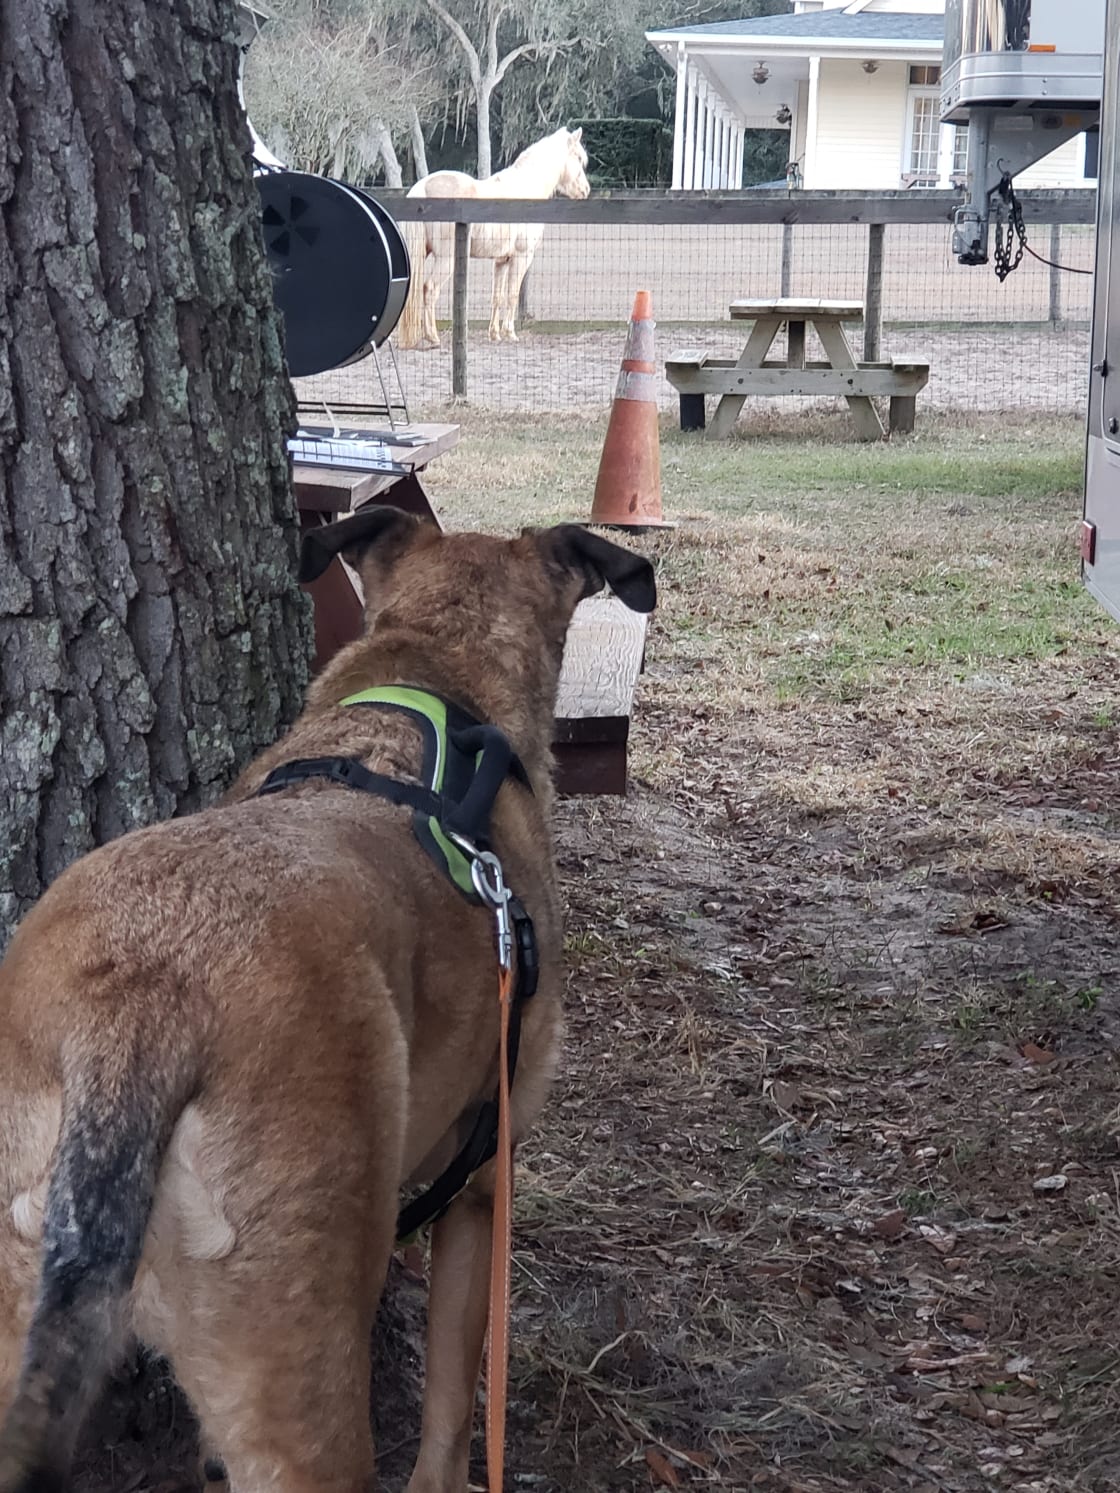 My pup observing a beautiful horse